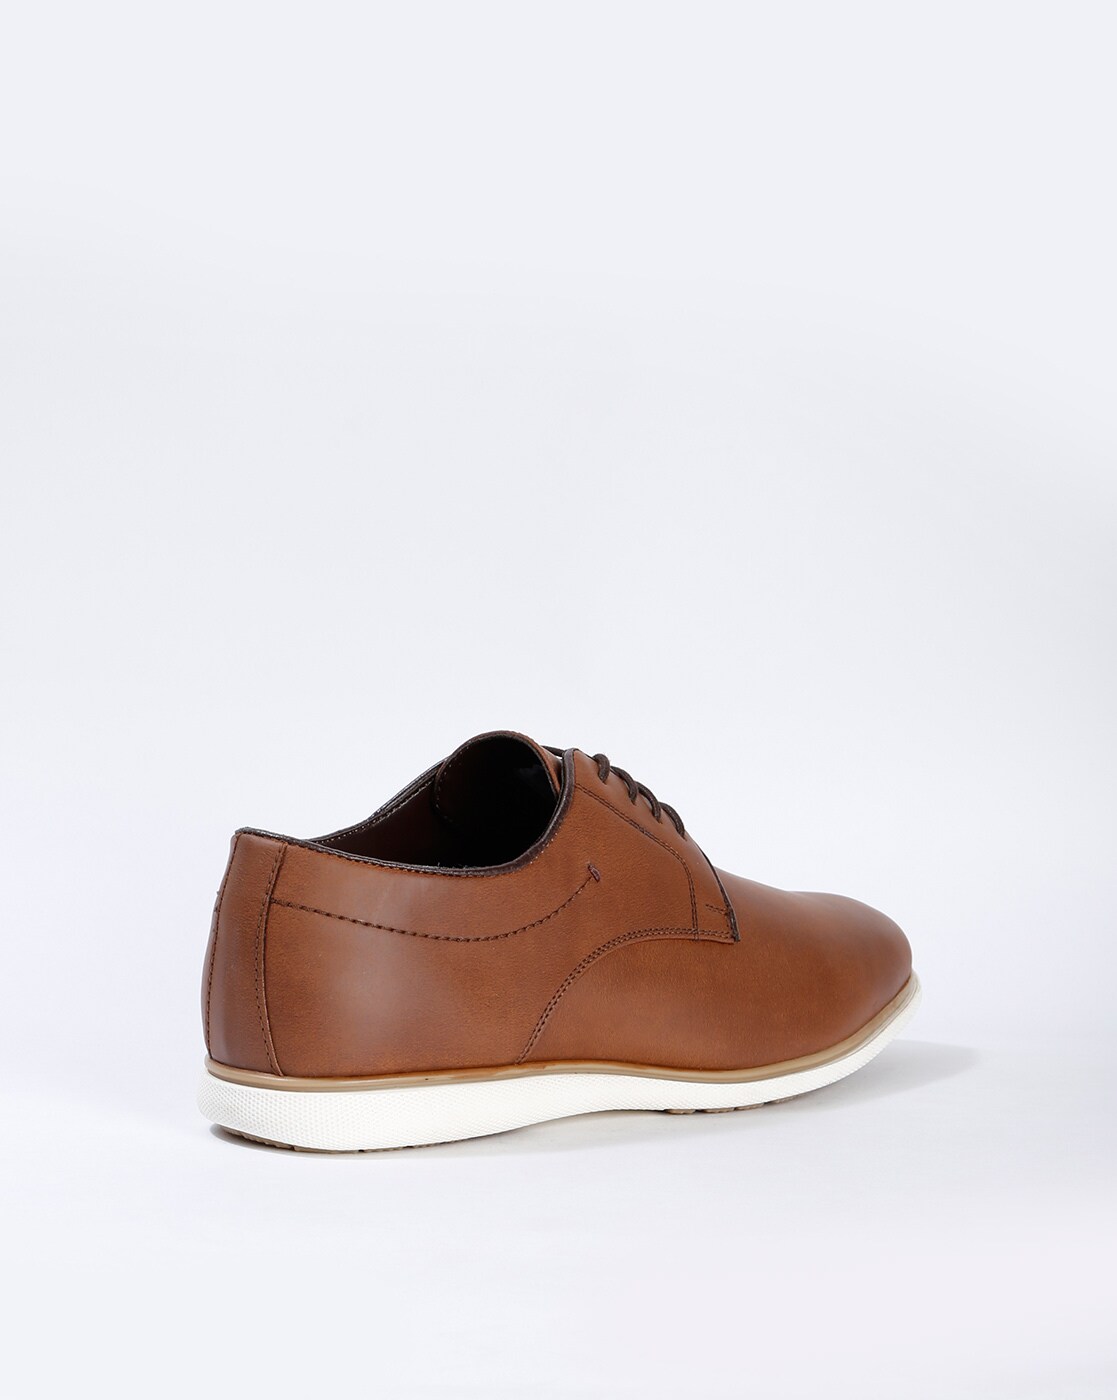 Buy Tan Brown Casual Shoes for Men by 